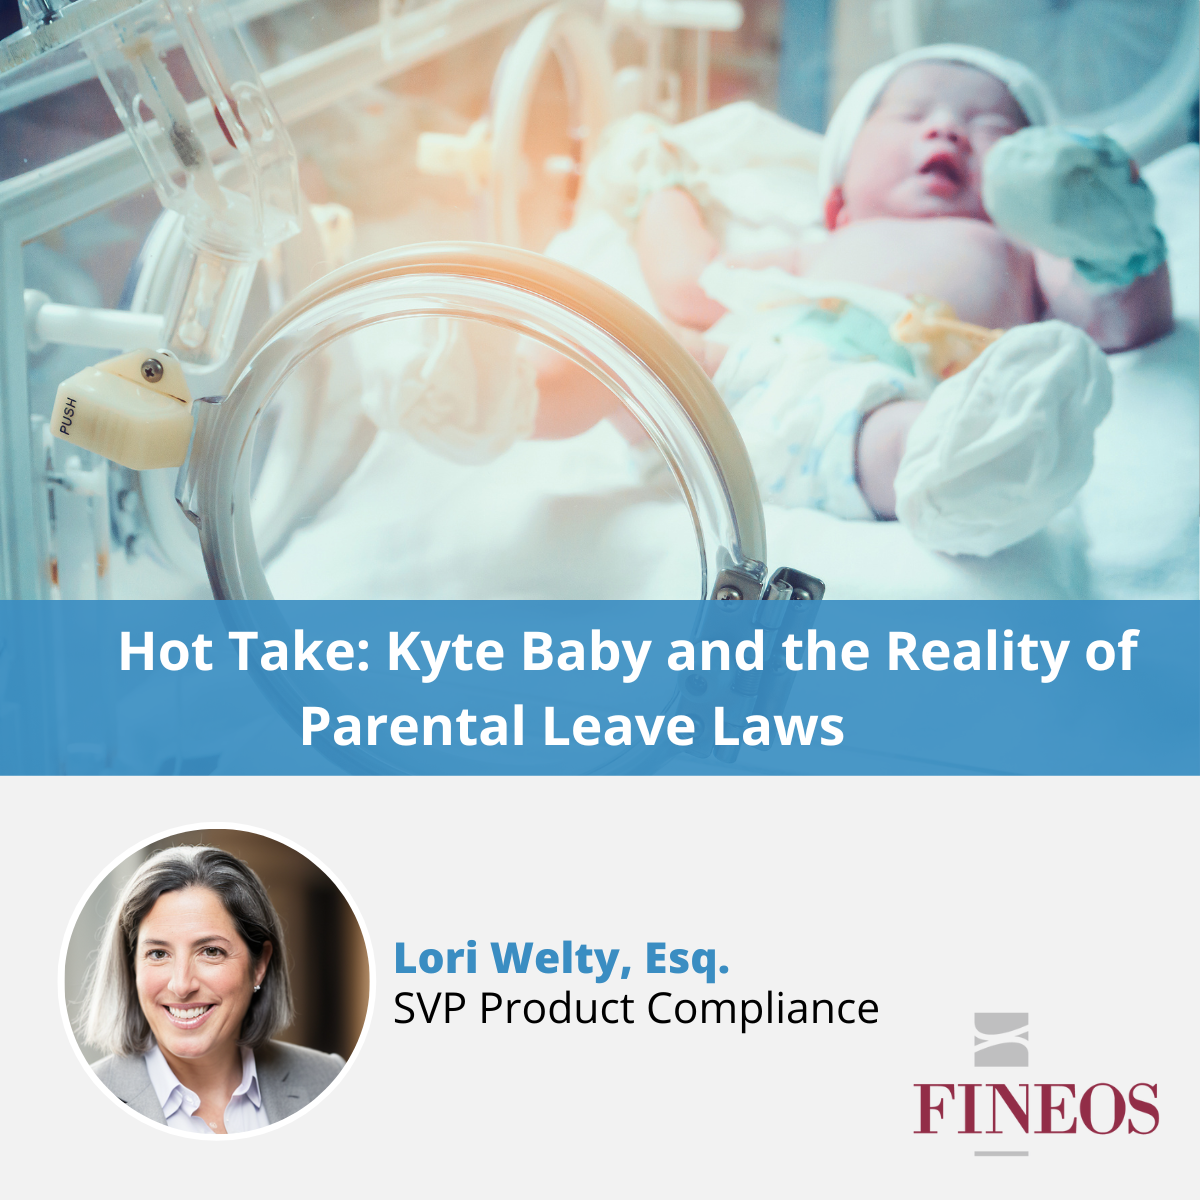 Kyte Baby and the Reality of Parental Leave Laws | FINEOS